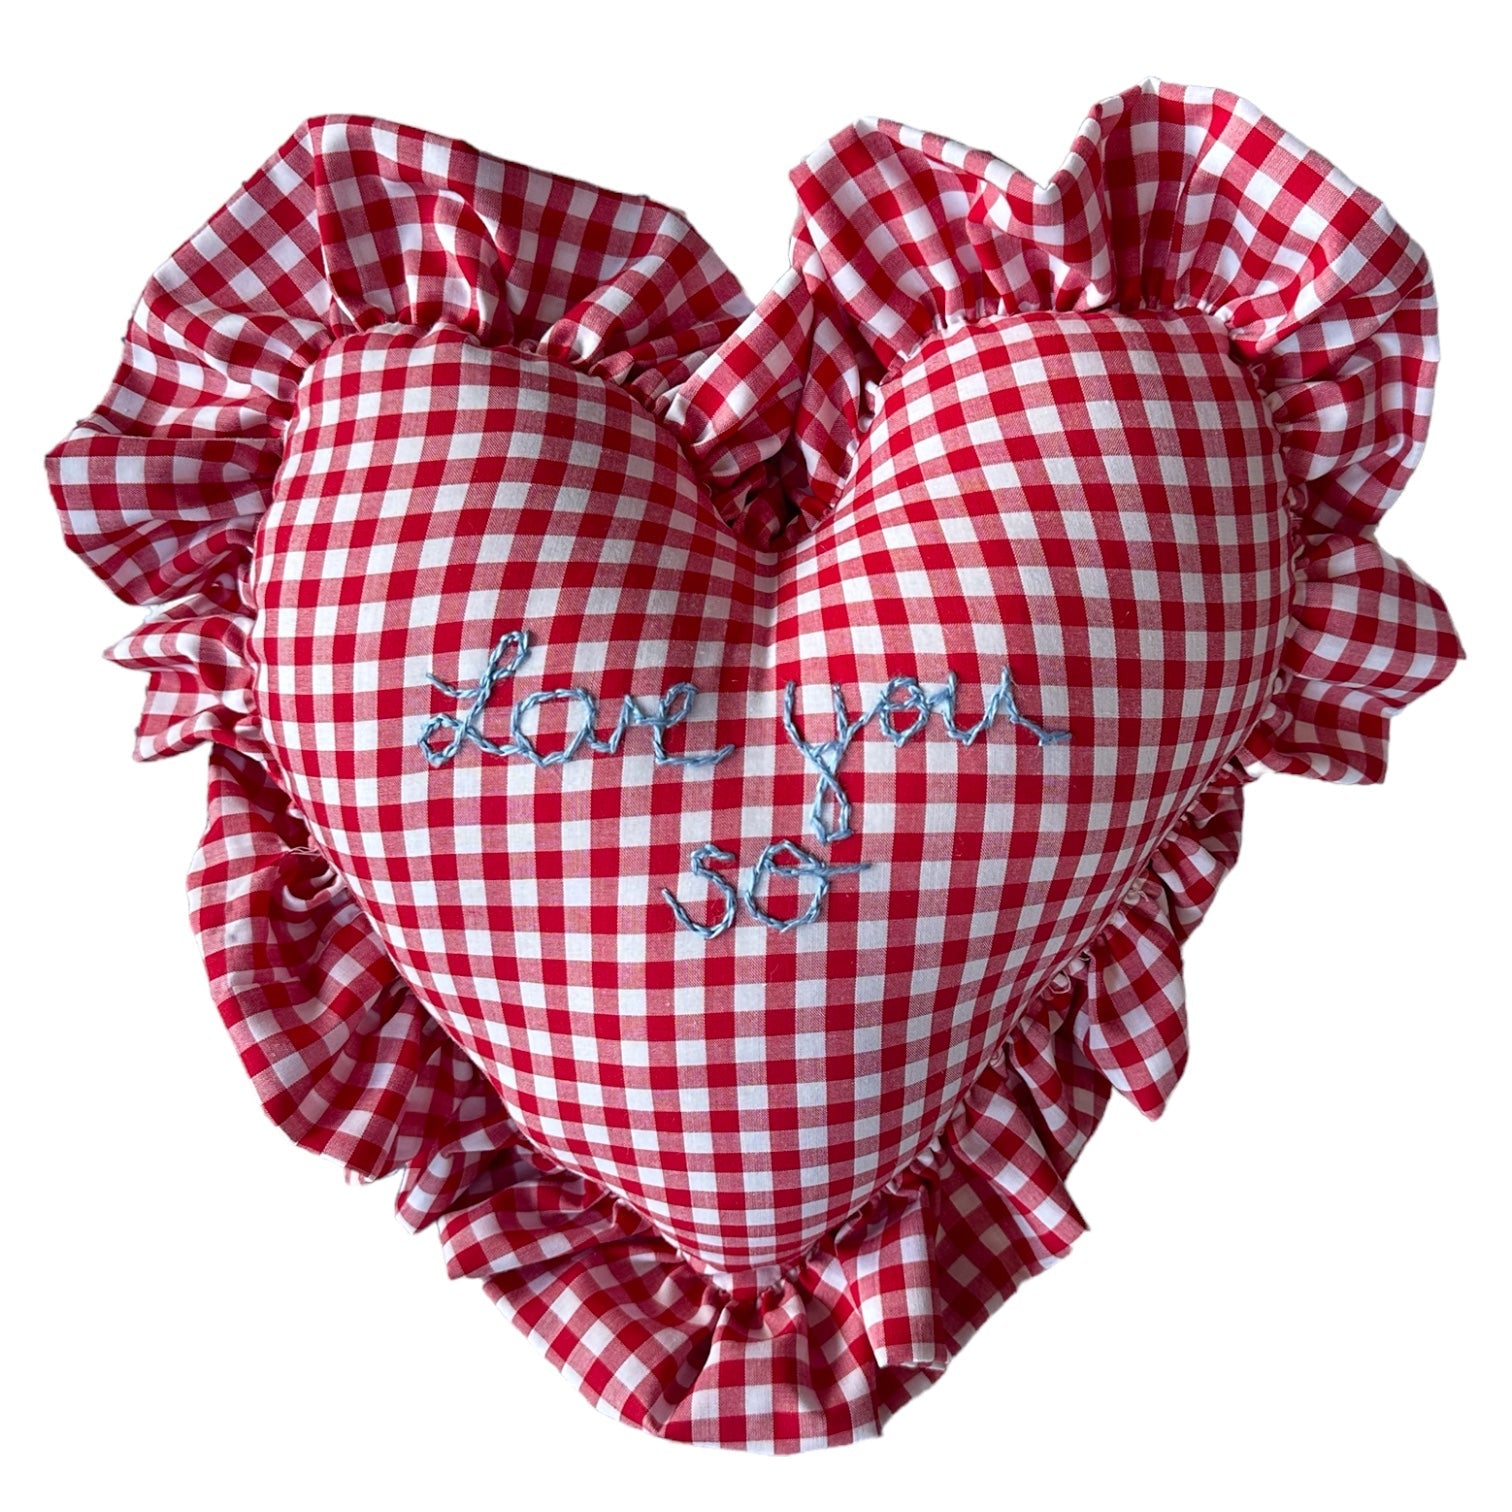 Heart Ruffle Pillow - red gingham - Premium  from Tricia Lowenfield Design 